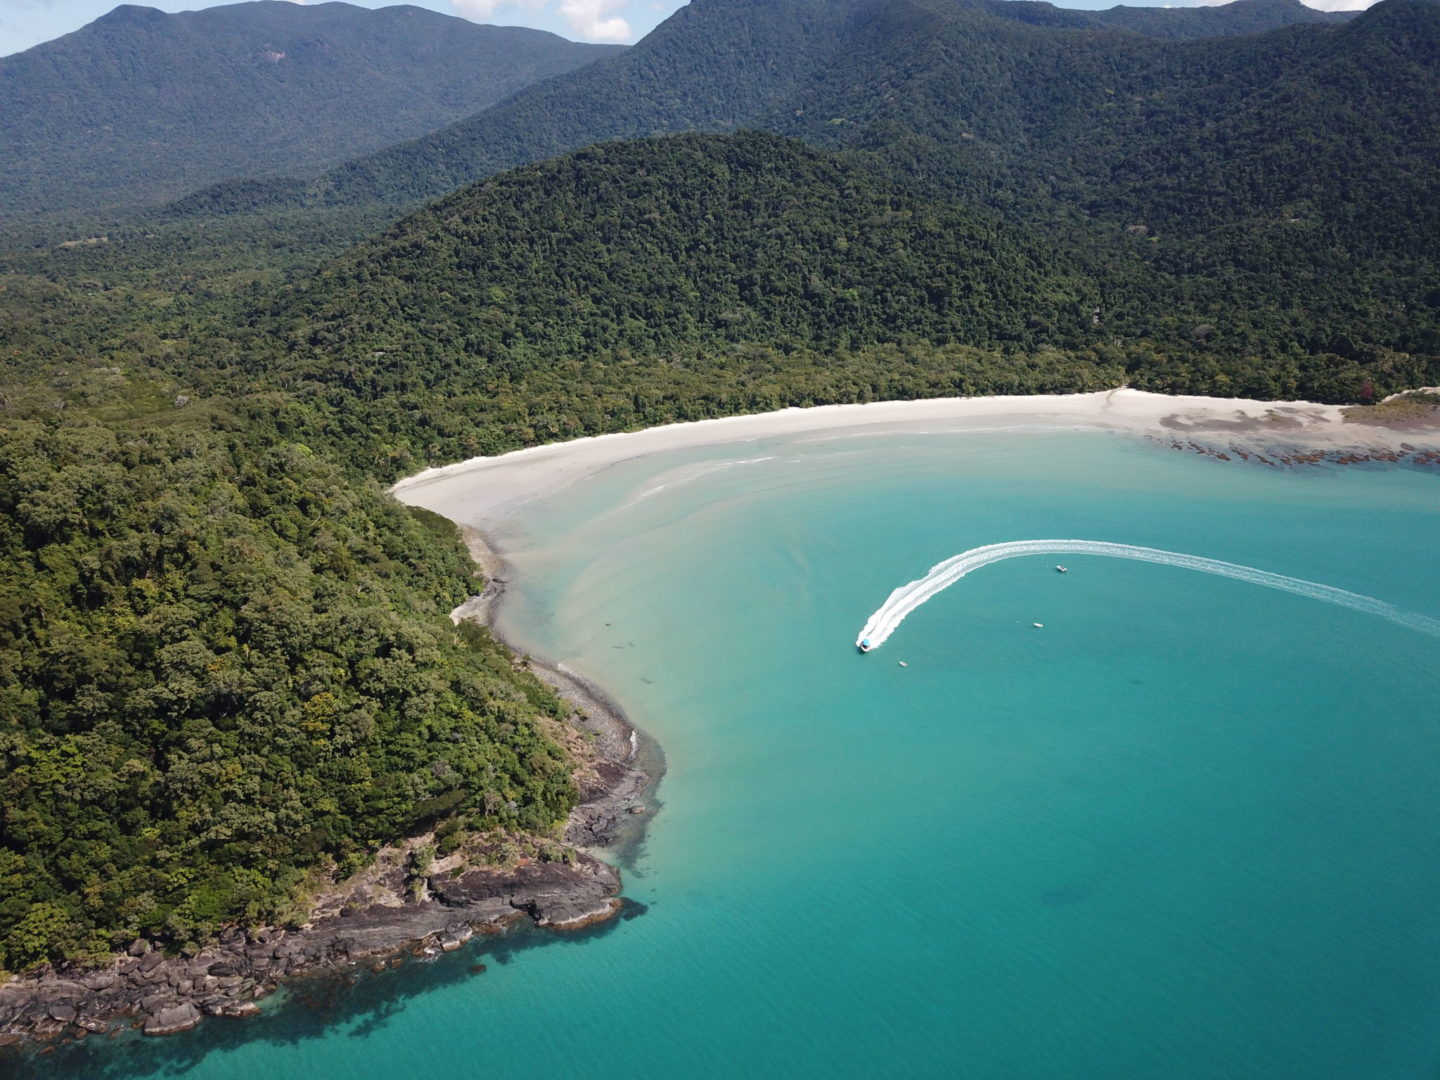 Tropical North Queensland Highlights Top 8 Things To Do And See